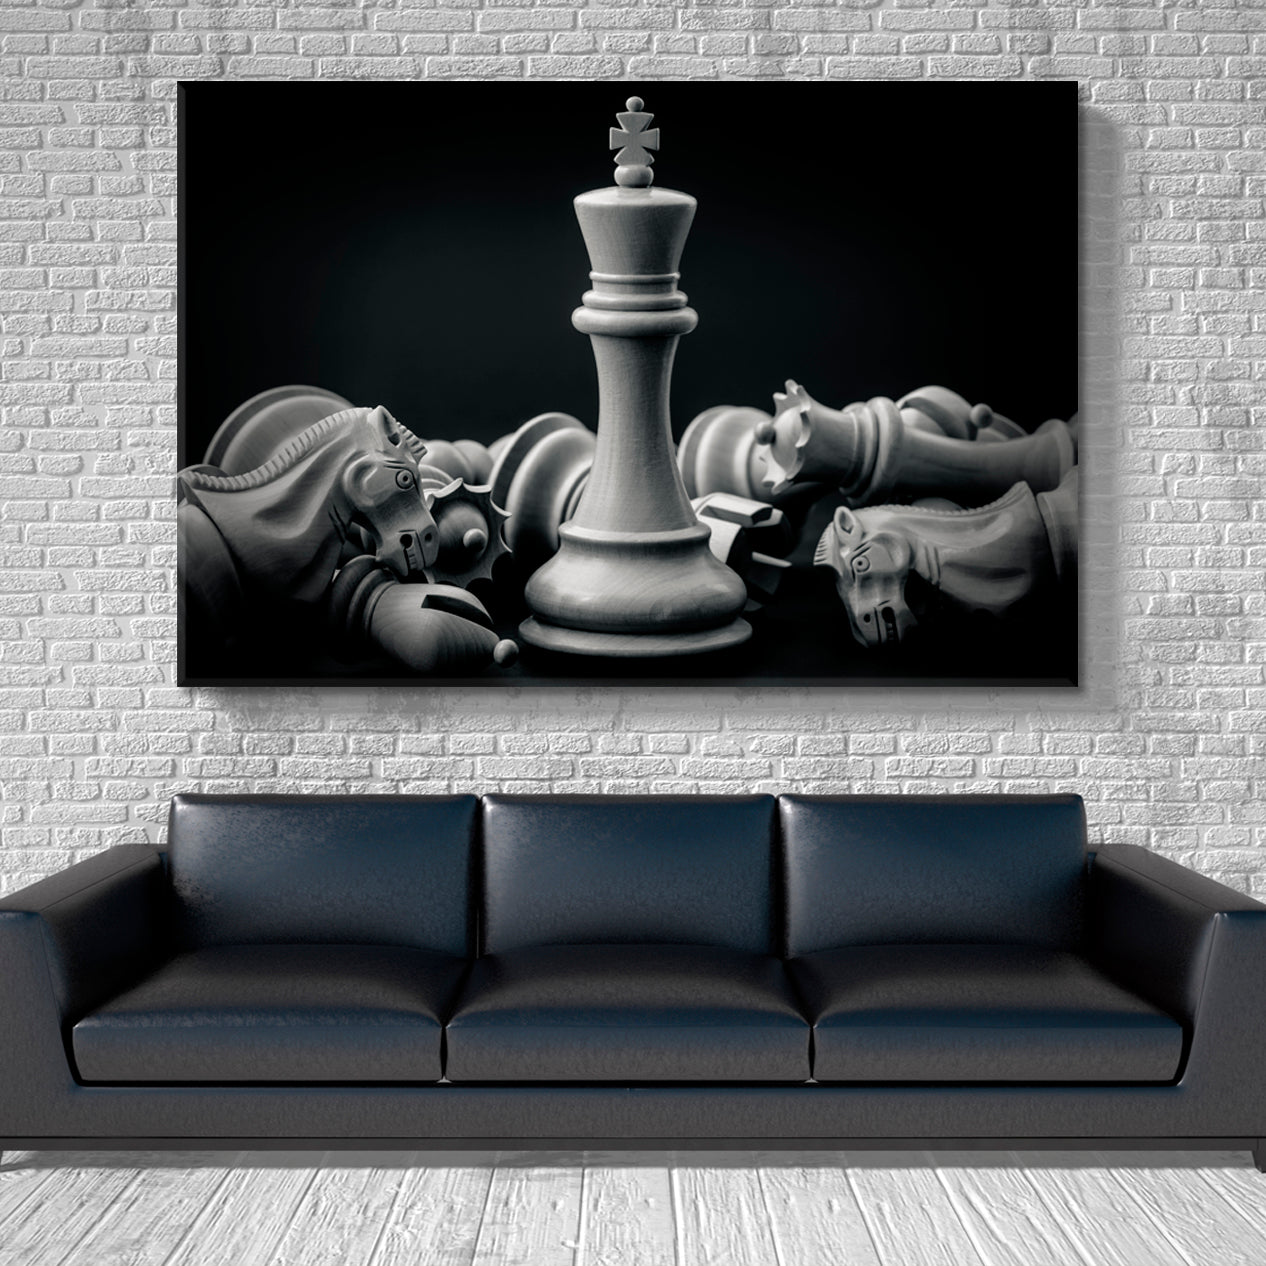 CHESS Black White King And Knight Leader Success Concept Poster Business Concept Wall Art Artesty 1 panel 24" x 16" 